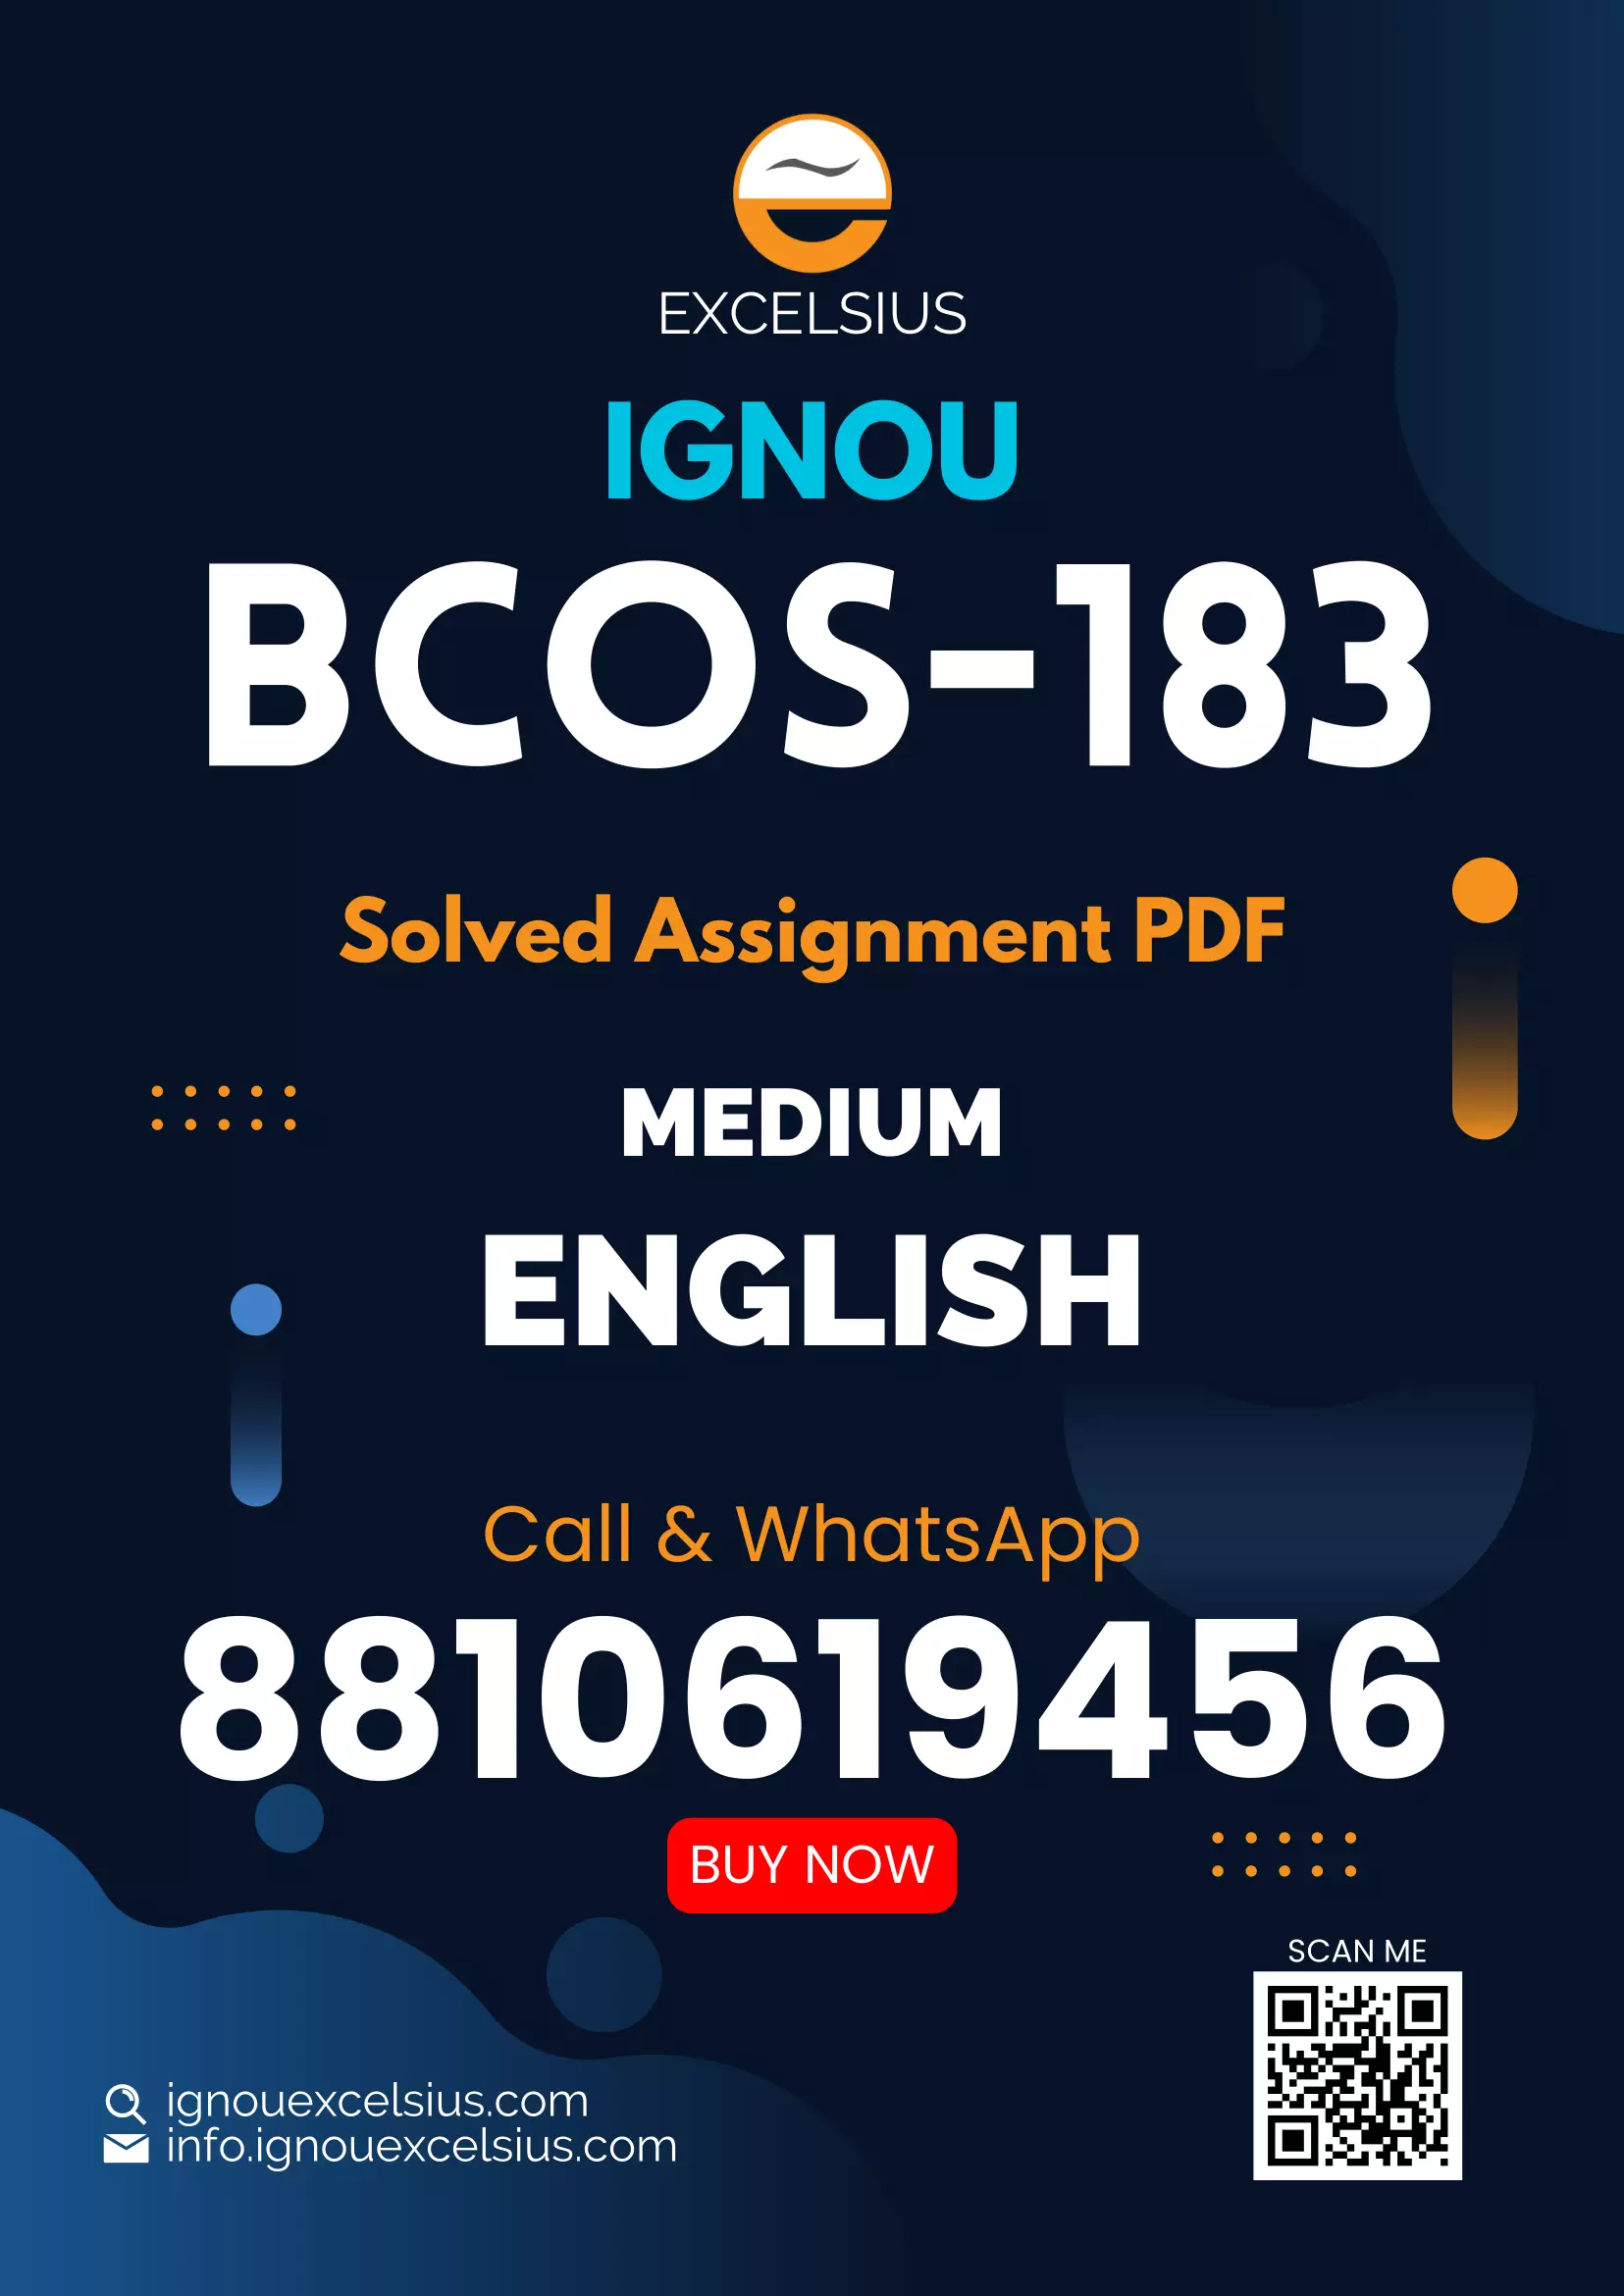 IGNOU BCOS-183 - Computer Application in Business, Latest Solved Assignment-July 2022 – January 2023